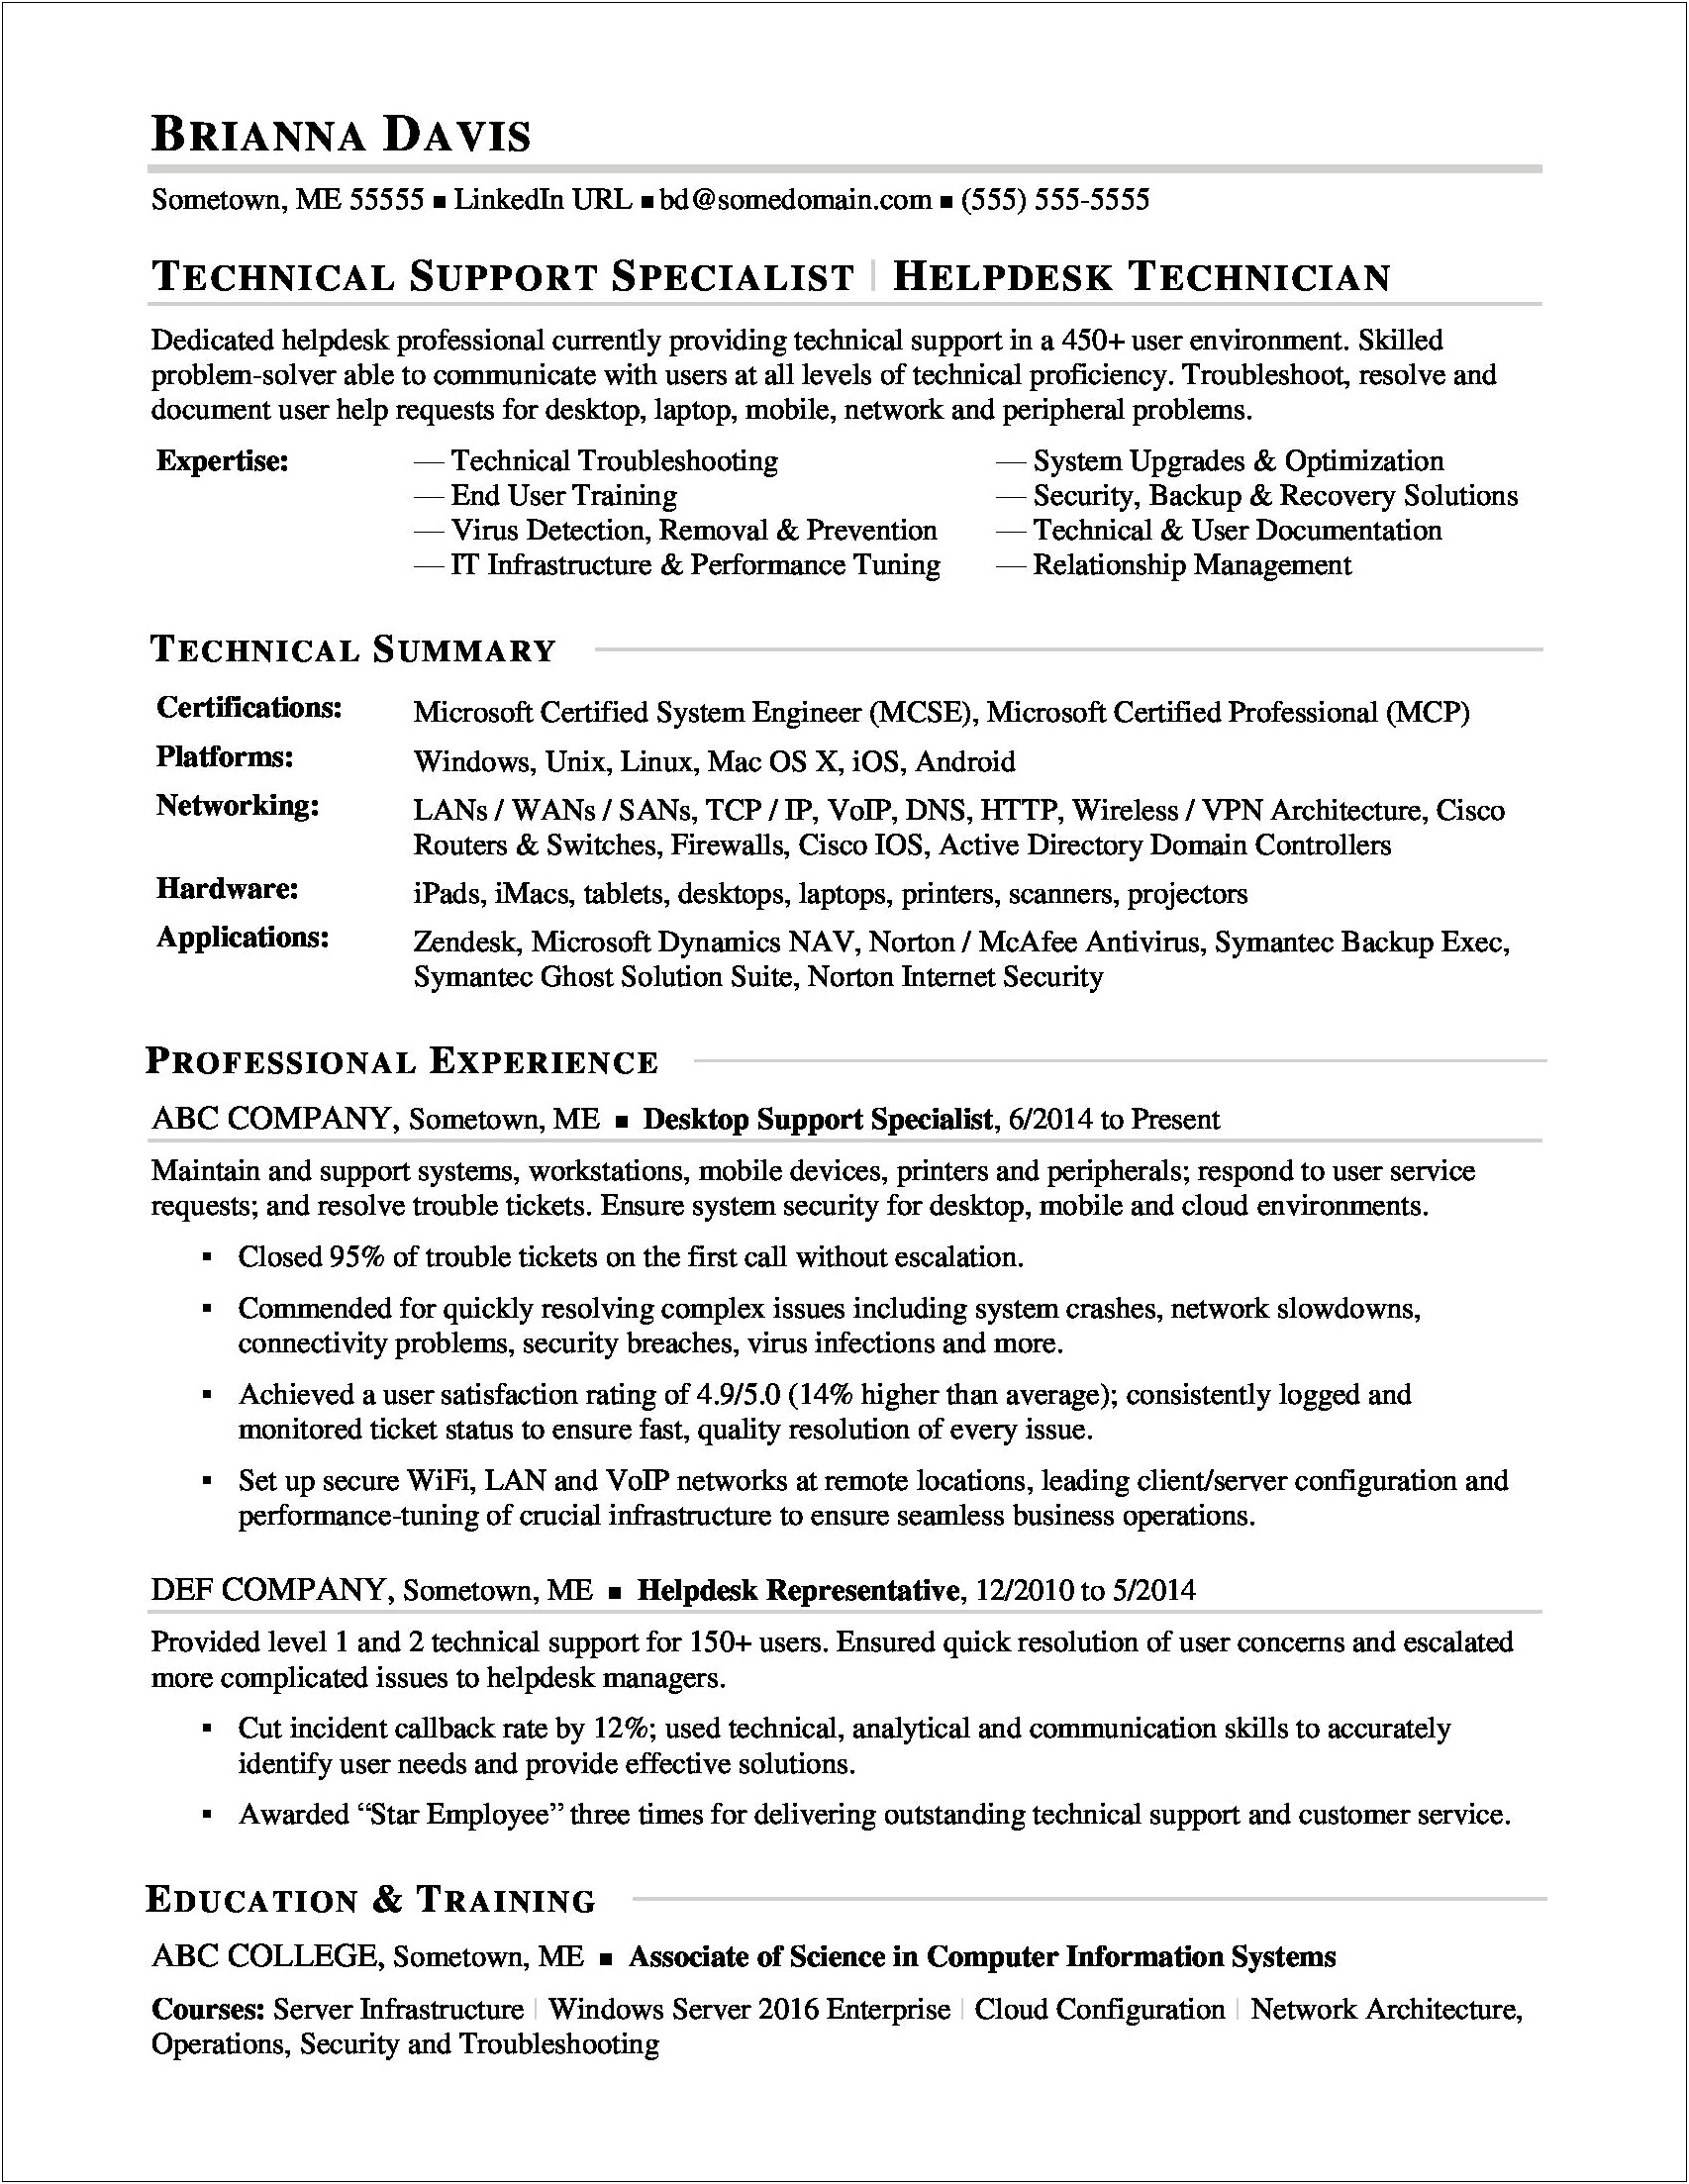 Objective Statement For A Help Desk Resume